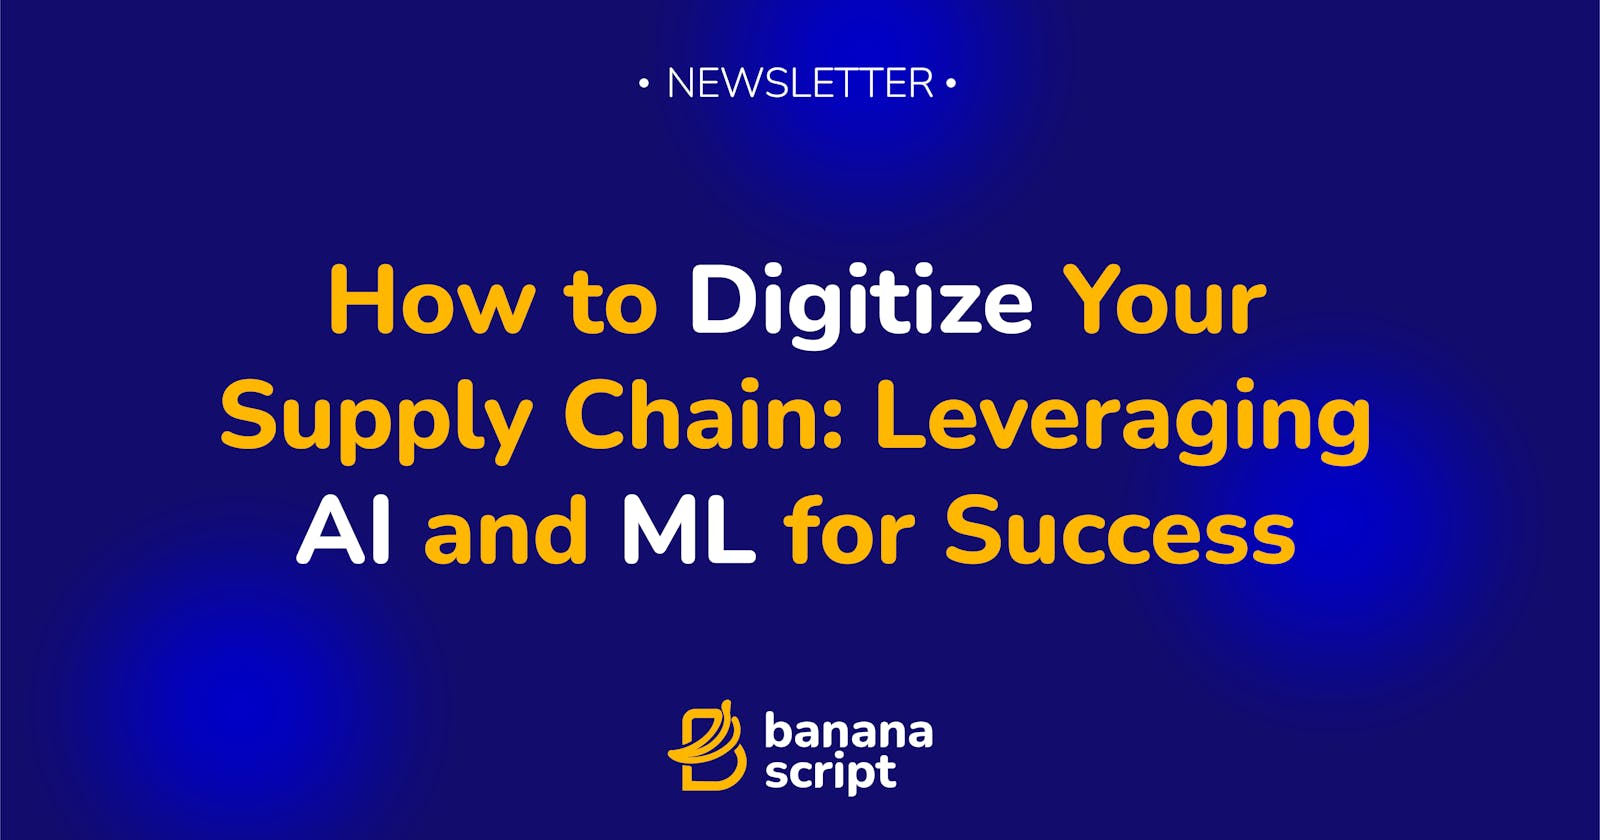 How to Digitize Your Supply Chain: Leveraging AI and ML for Success